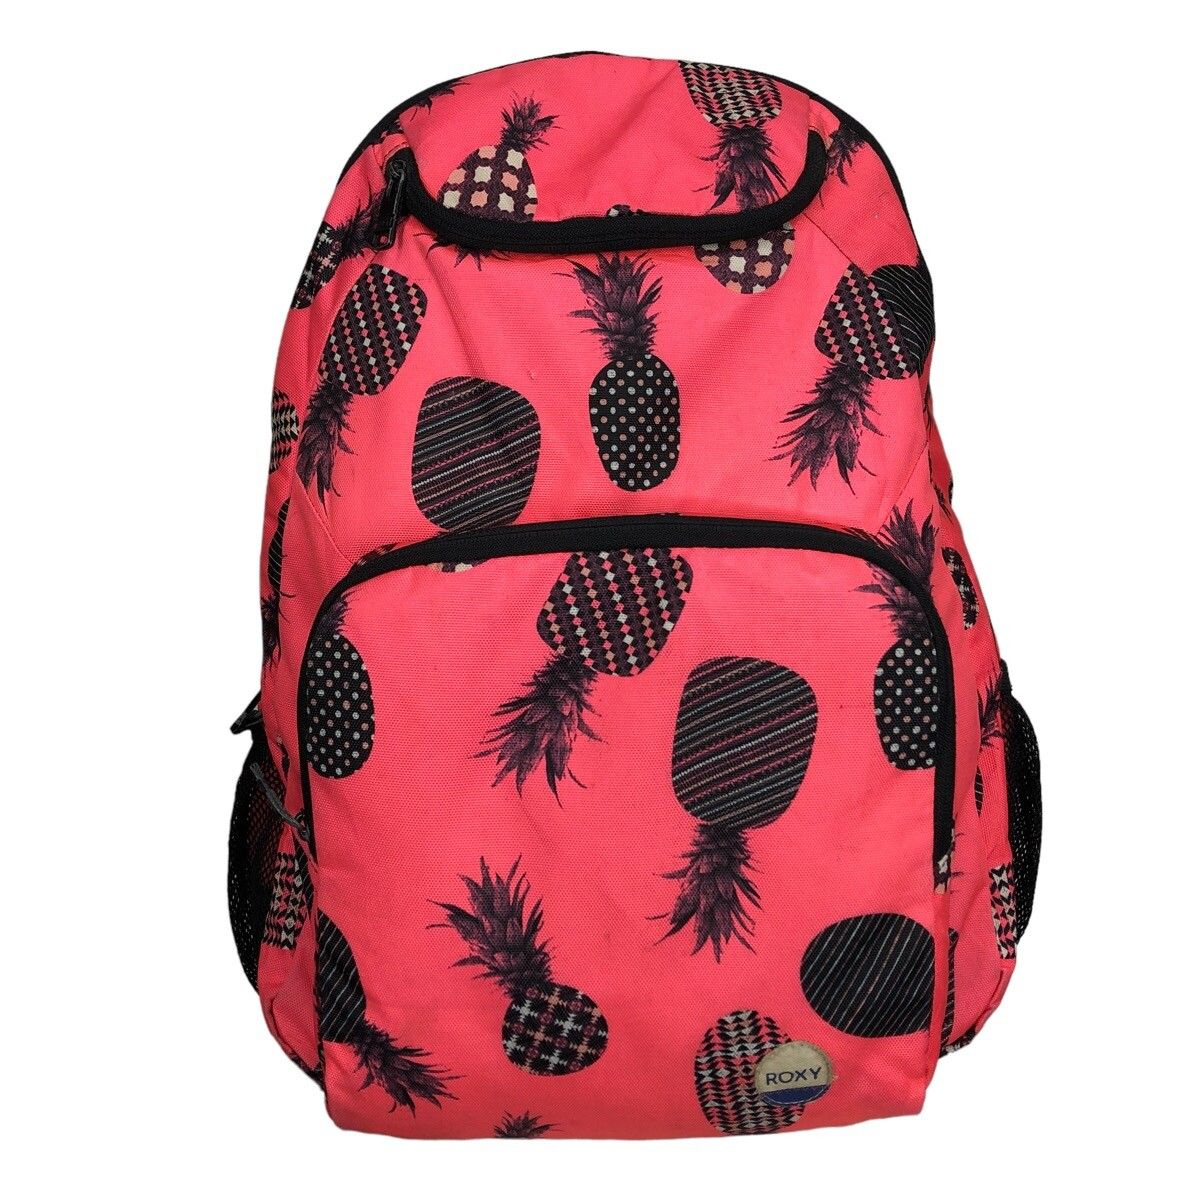 Quicksilver - Roxy Pineapple Backpack - 1